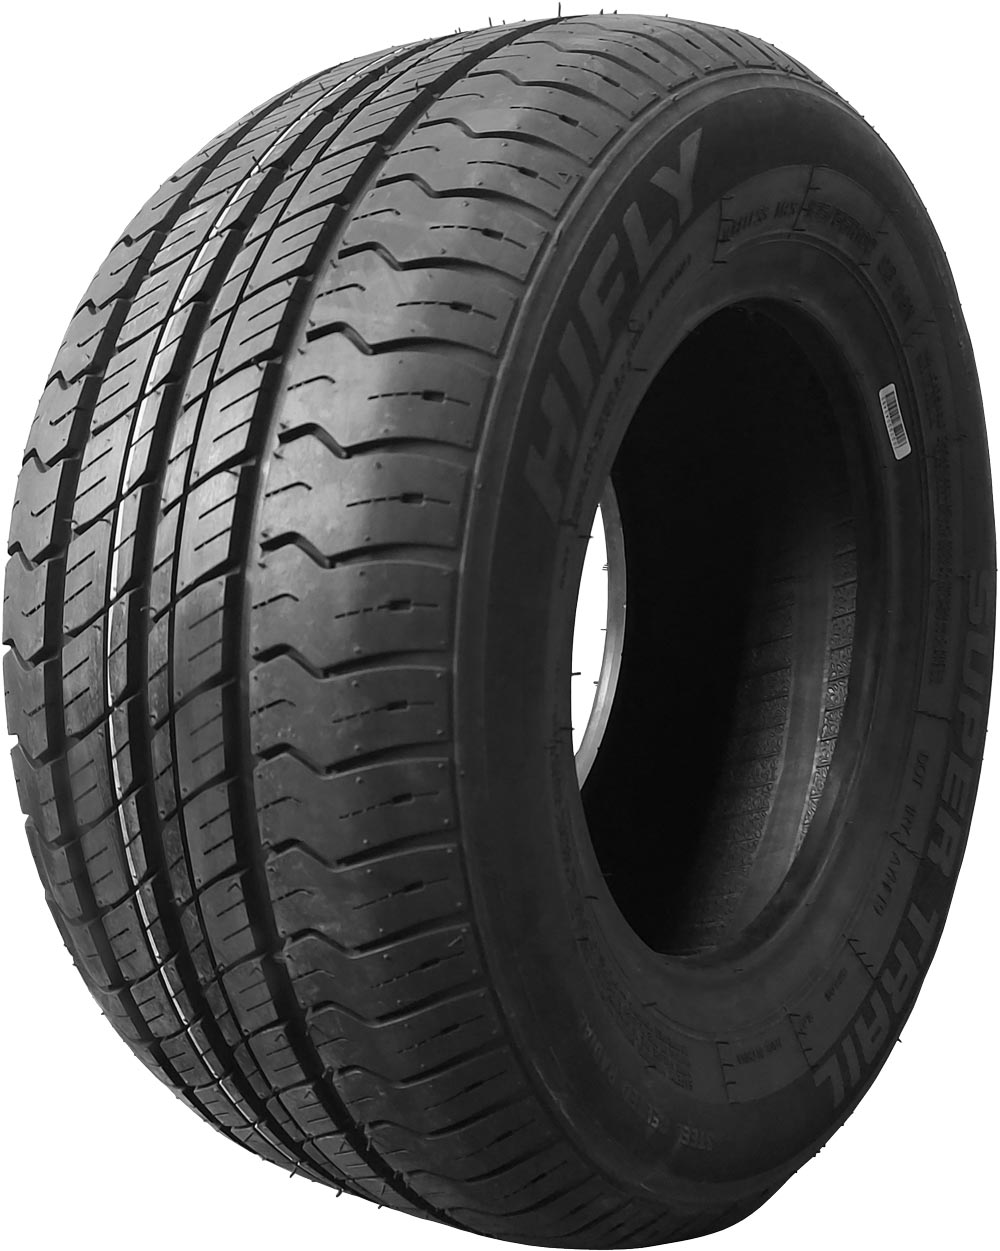 Anvelope microbuz HIFLY SUPER TRAIL 195/55 R10 98N